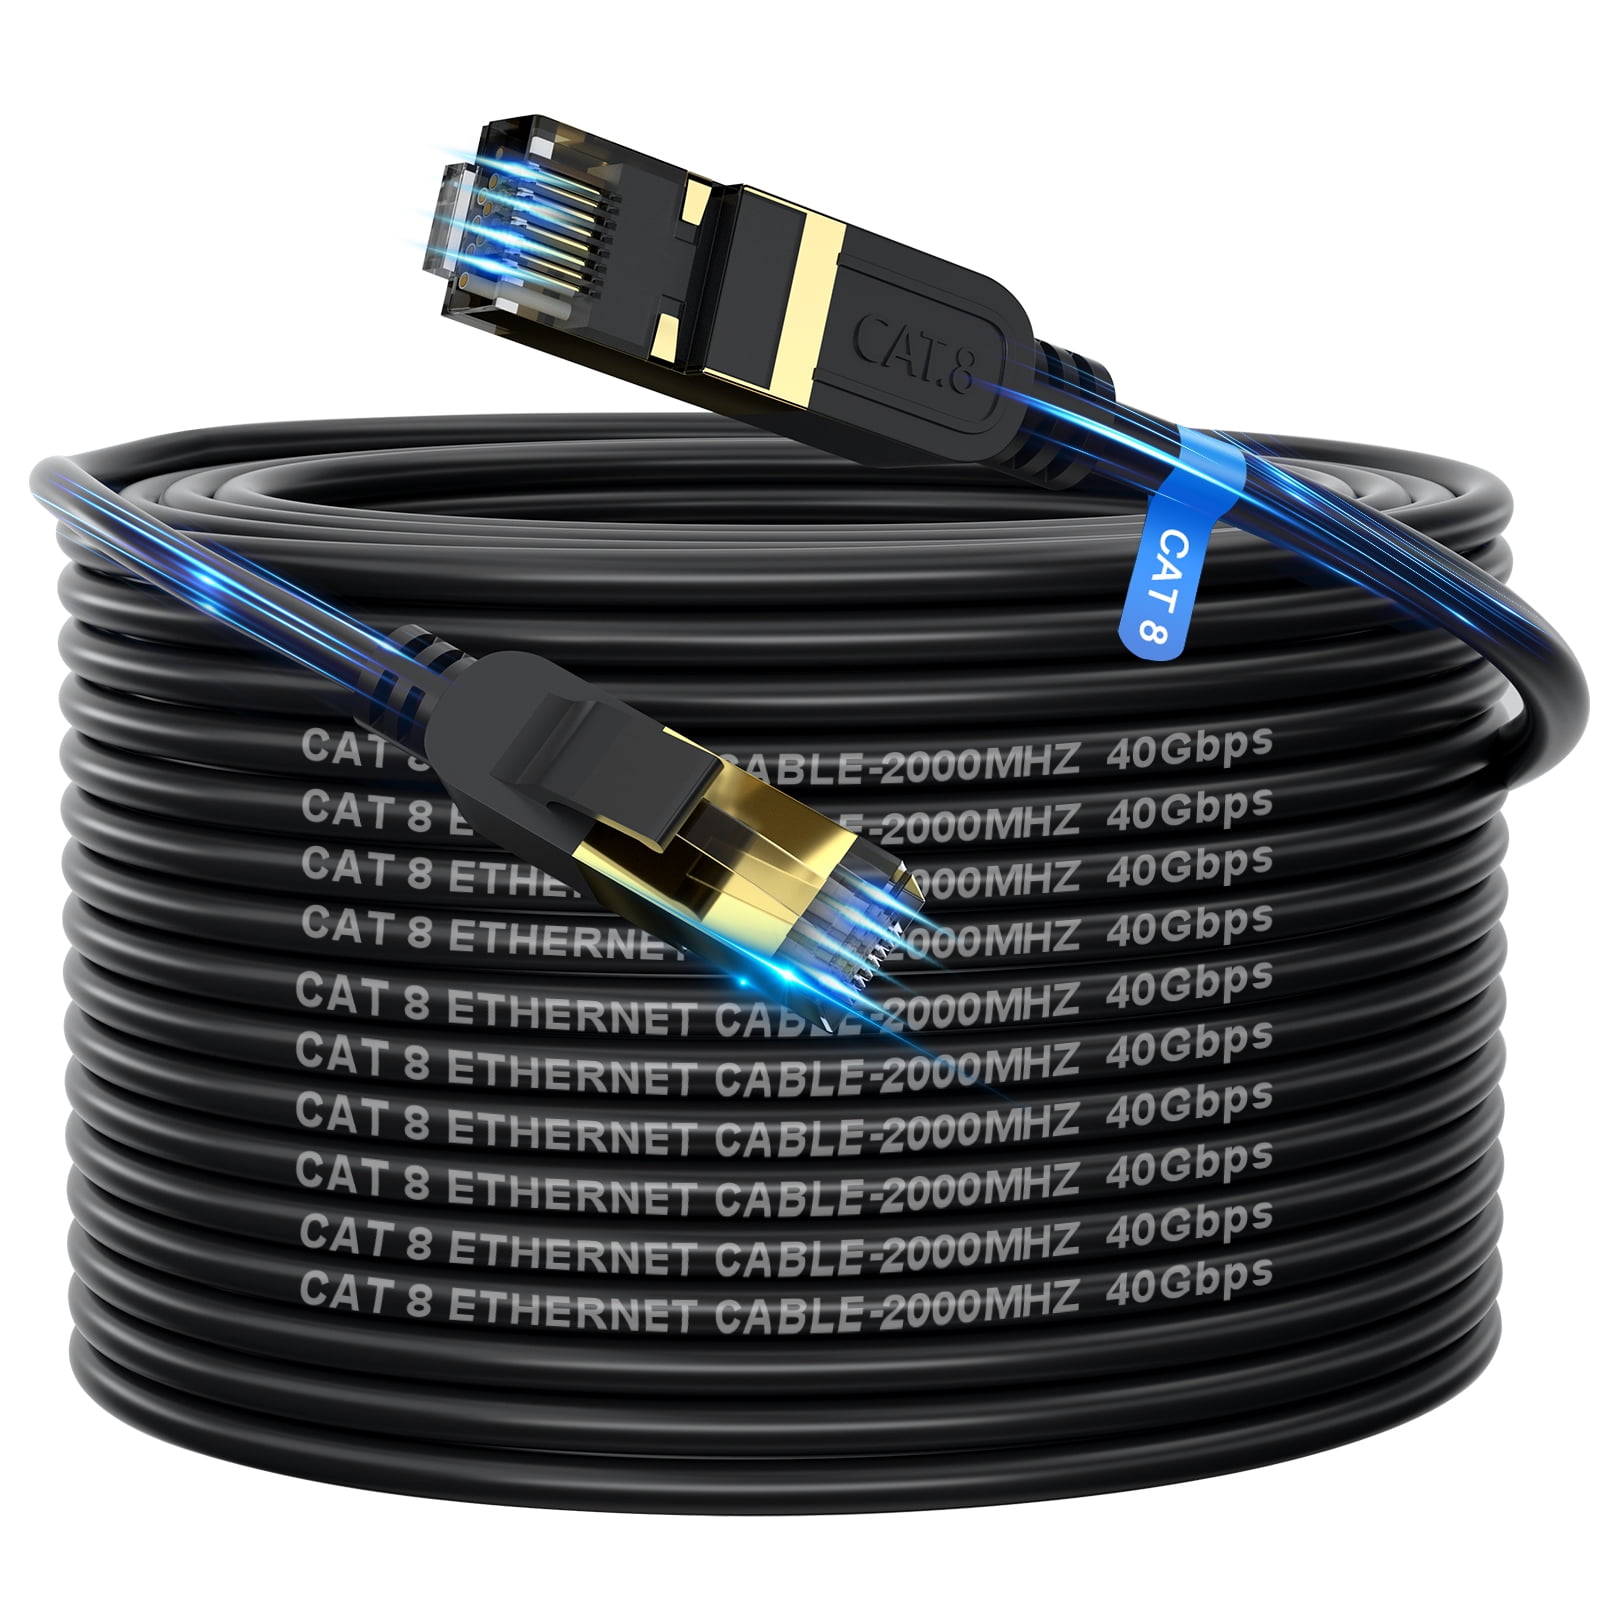 Cat8 Ethernet Cable-150FT, Gold-Plated RJ45 Connector, 26AWG, 40Gbps,  2000Mhz, High-Speed Internet Cable for Gaming, Streaming and Office Use 